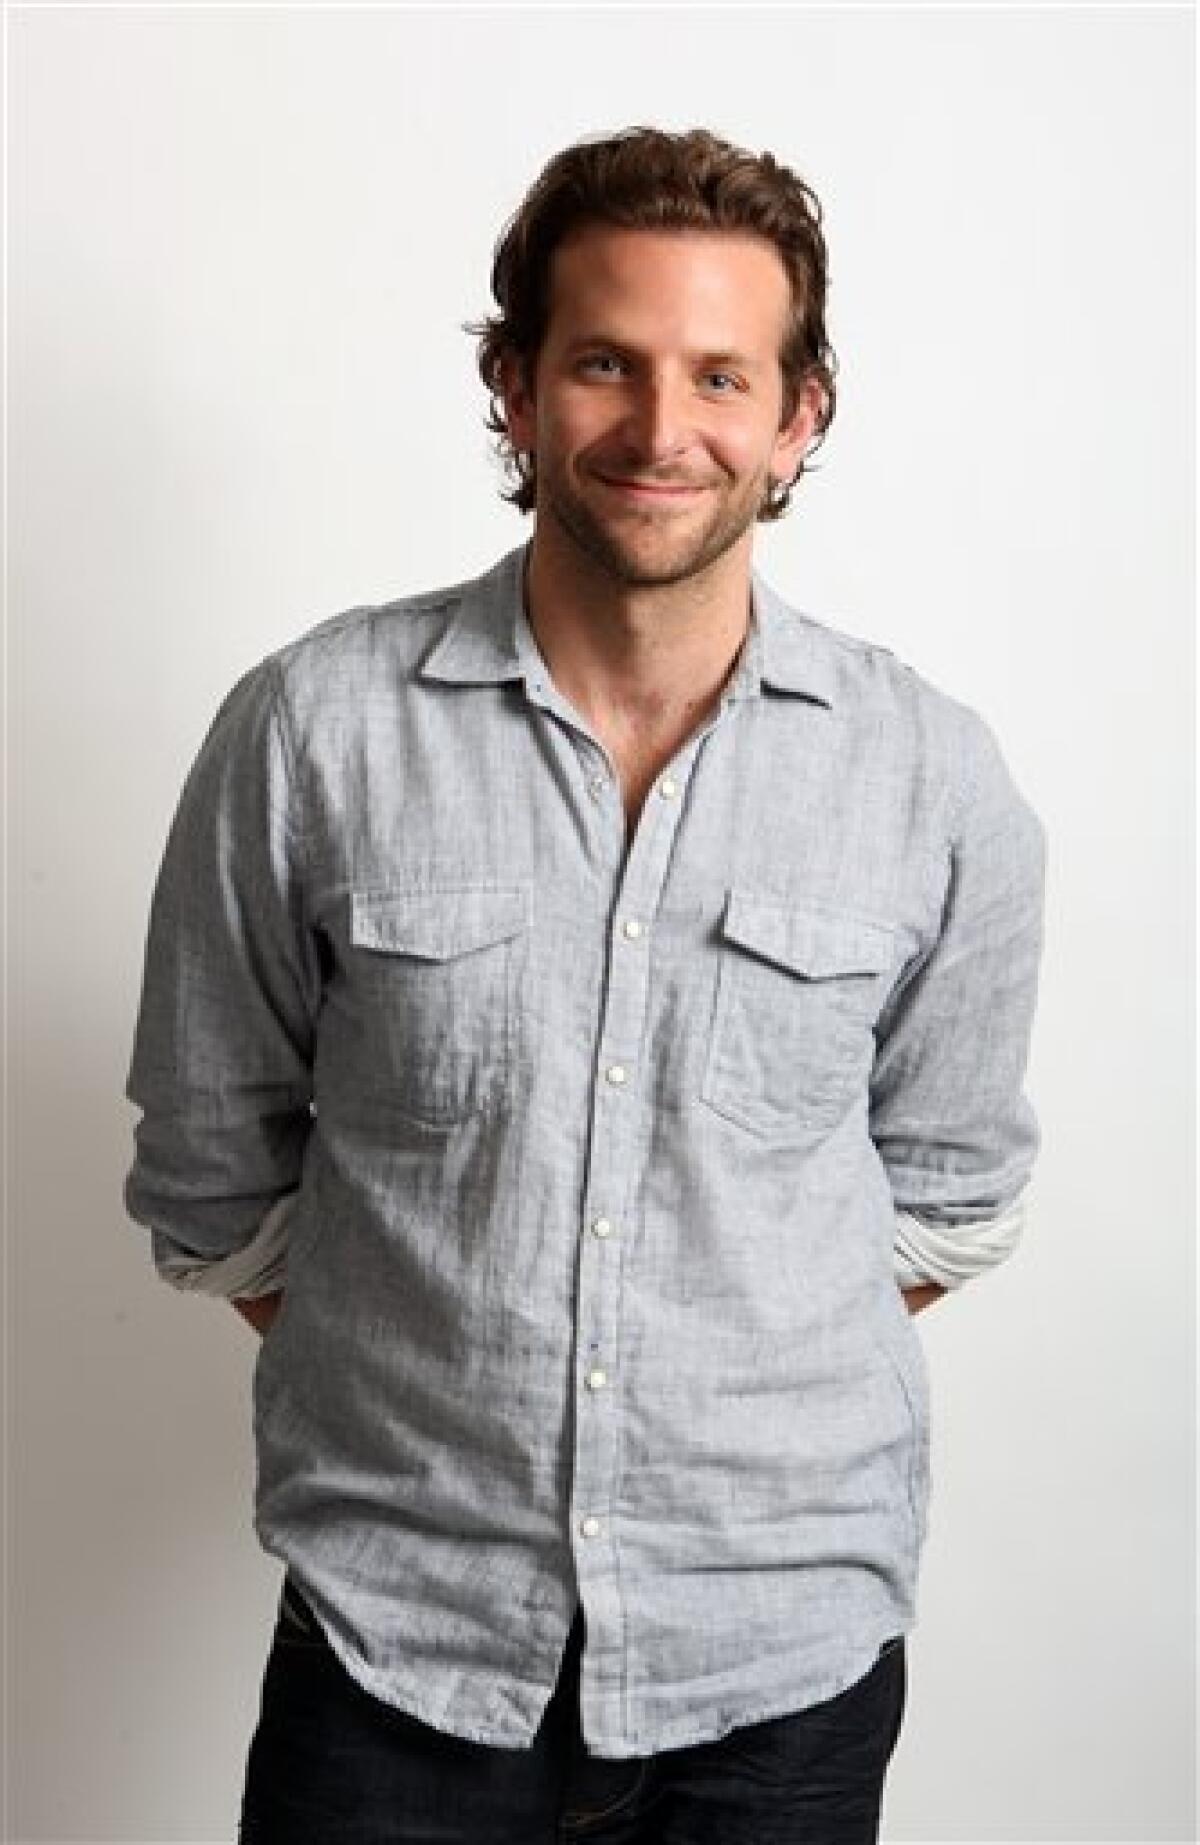 Actor Bradley Cooper, a cast member in the upcoming film "The Hangover," poses for a portrait, Saturday, May 16, 2009 in Las Vegas. (AP Photo/Isaac Brekken)